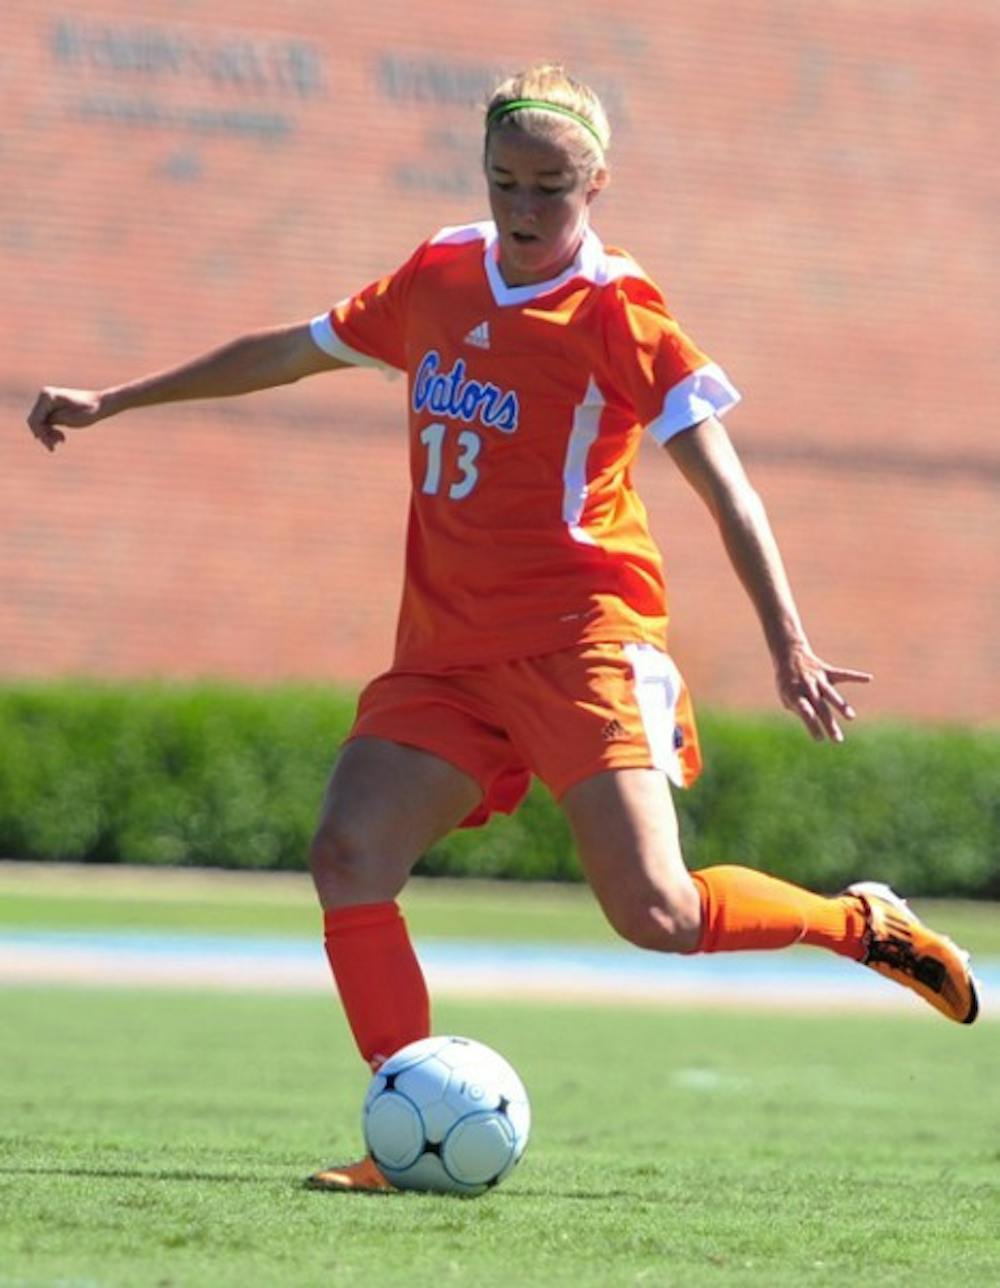 <p>Freshman Annie Speese led the Gators on Sunday with two goals and an assist in the team’s 4-1 win against Alabama at home.</p>